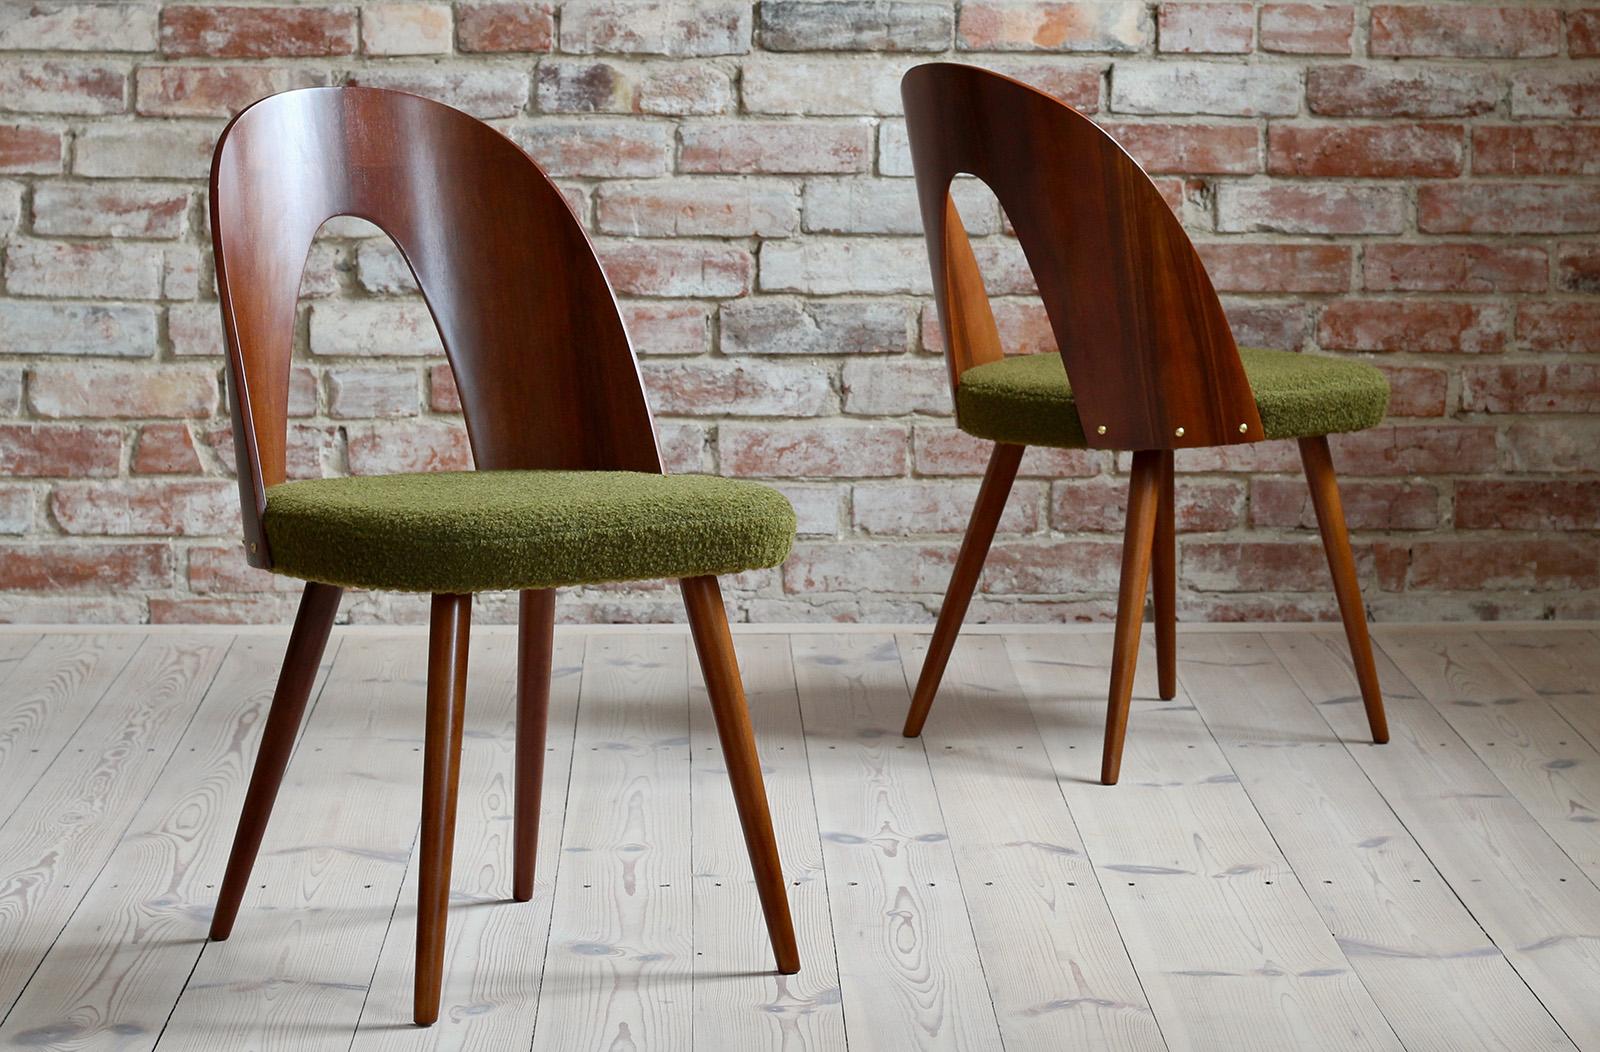 This set of four vintage dining chairs was designed by Czech designer Antonin Šuman in the 1960s. Produced by Mier Topolcany. The chairs have been completely restored finished with high-quality lacquer that gave them beautiful finish and refreshed